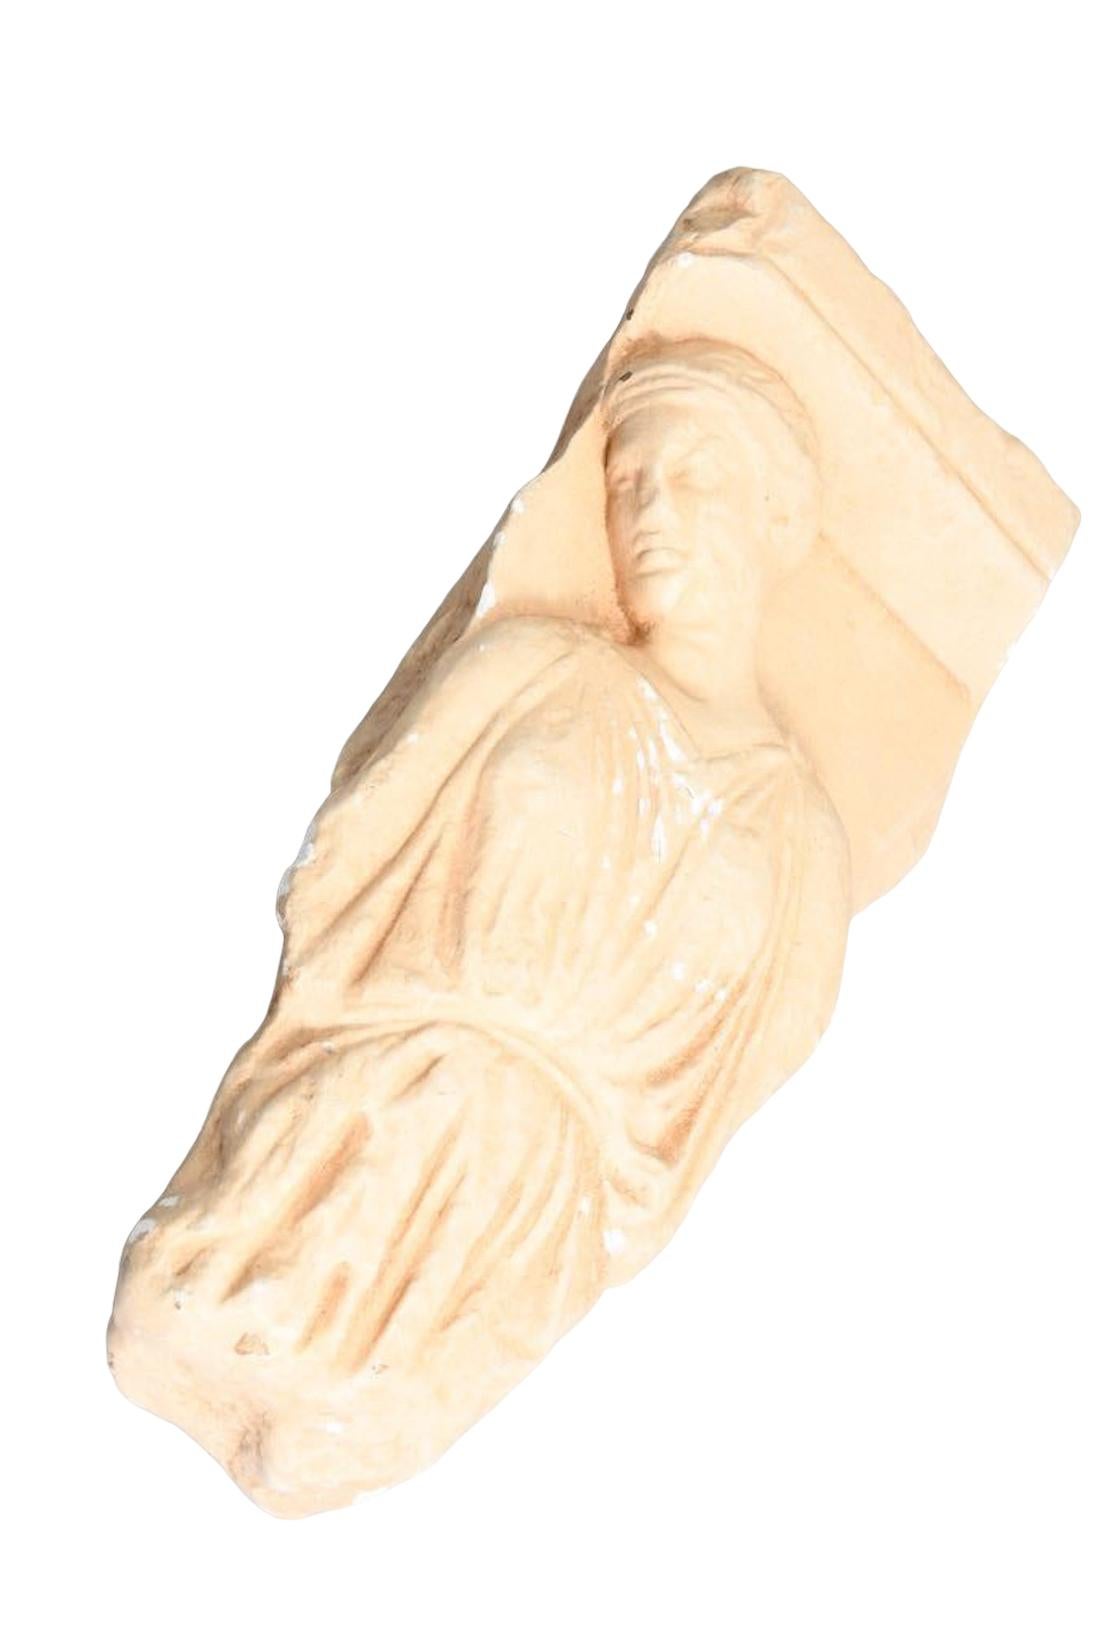 Plaster Museum Replica Fragment of a Marble Votive Relief from the Acropolis of Athens For Sale